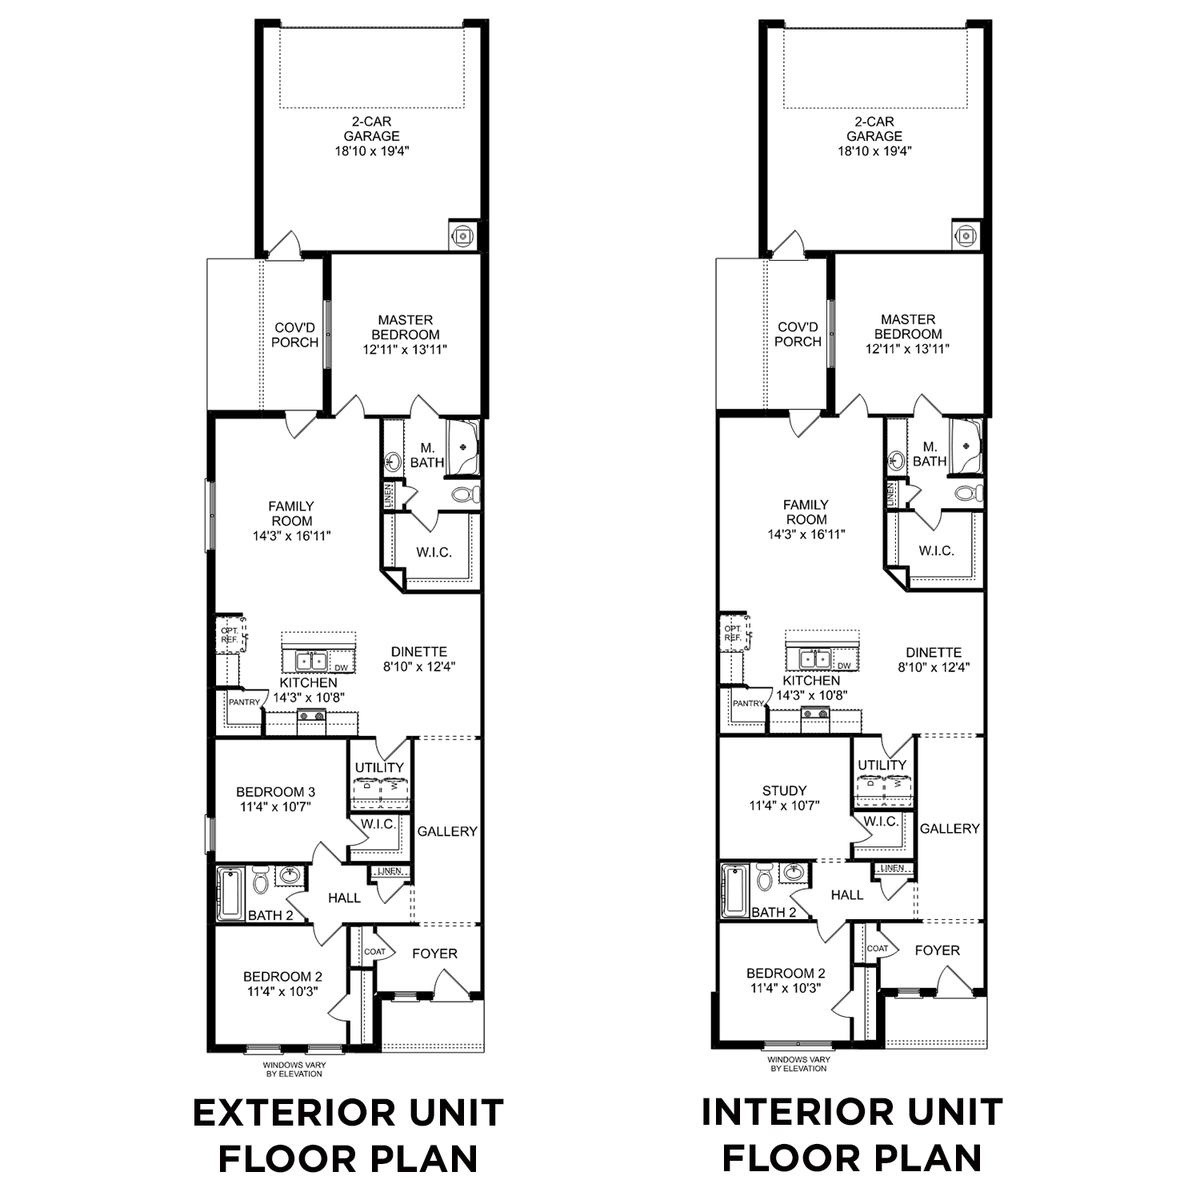 1 - The Camilla C floor plan layout for 403 Ronnie Drive in Davidson Homes' Cain Park community.